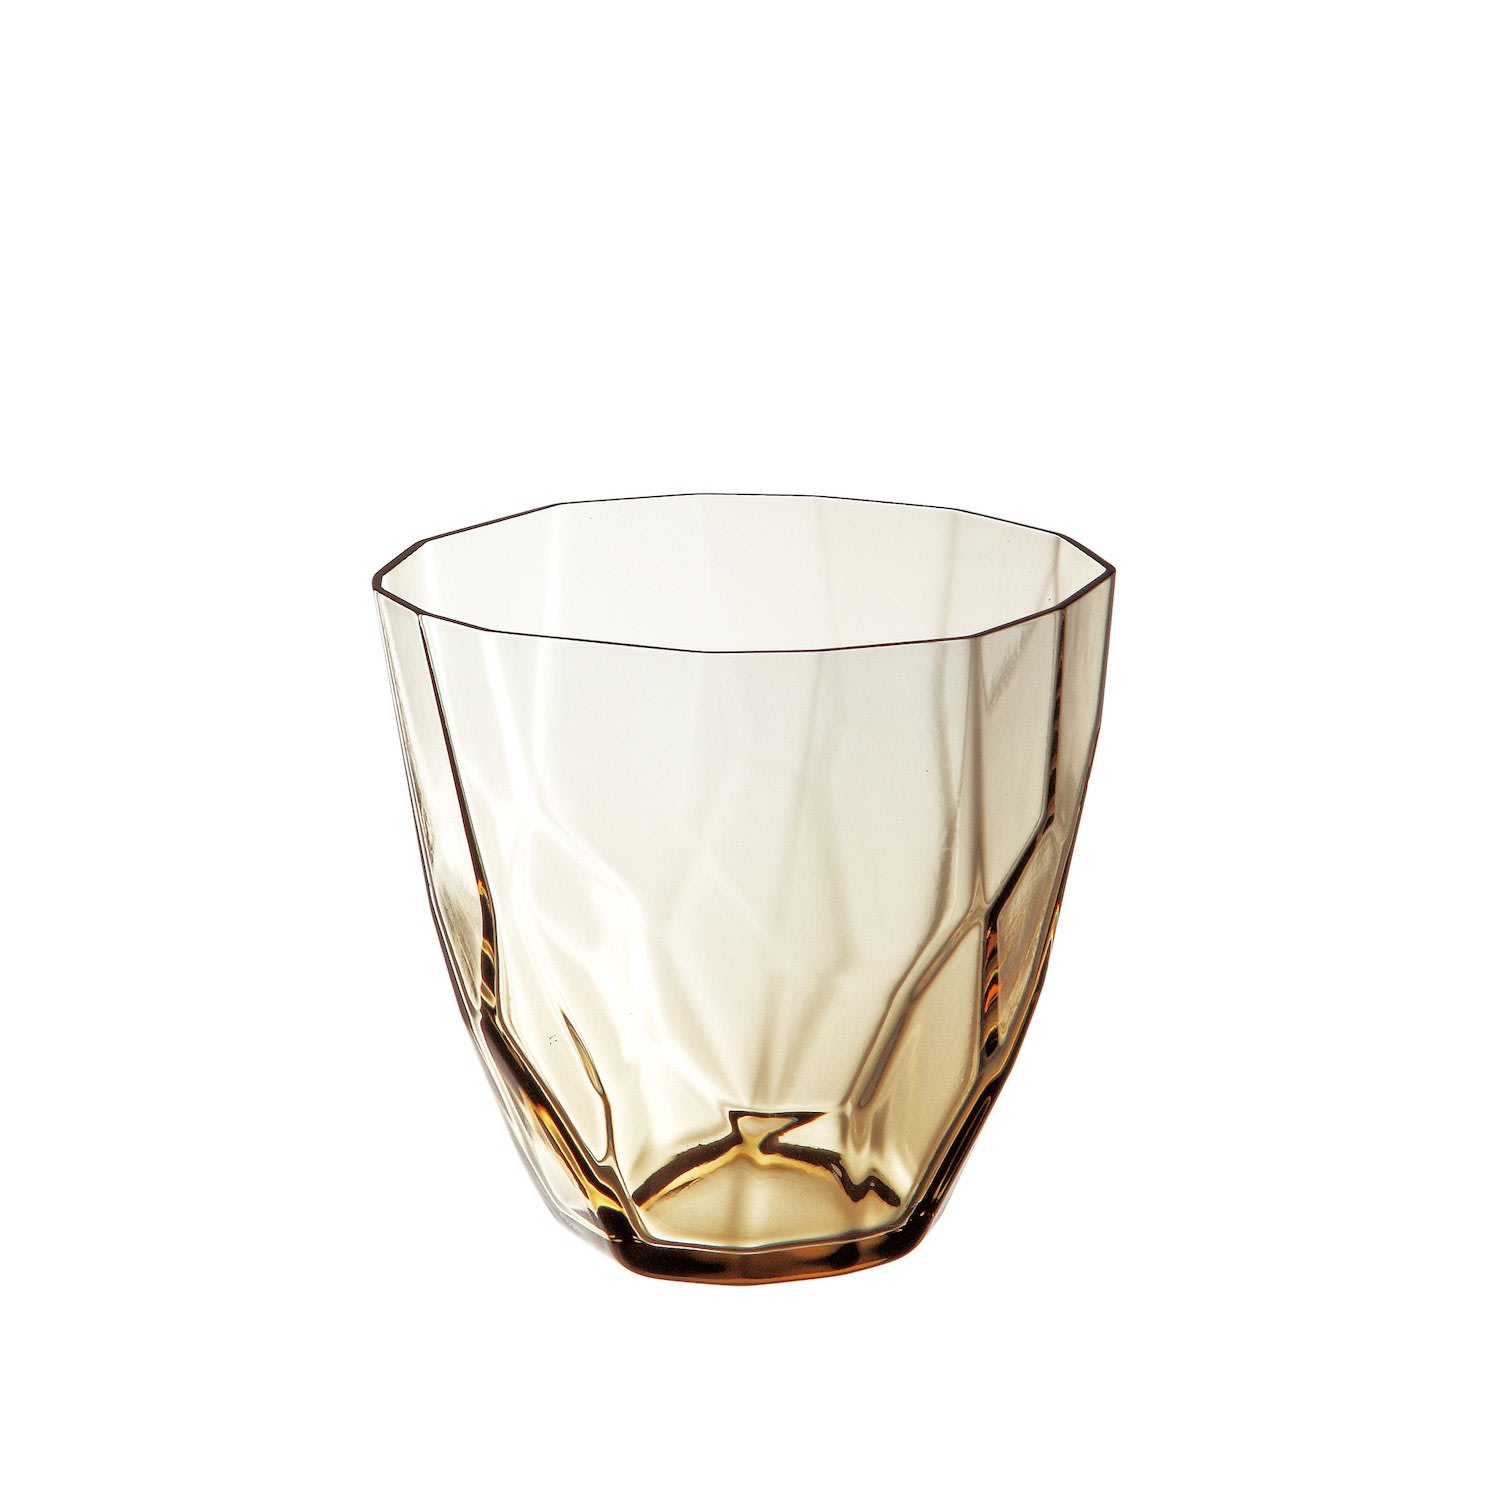 Sghr Sugahara Ginette Faceted Old Fashioned Glass - Brown